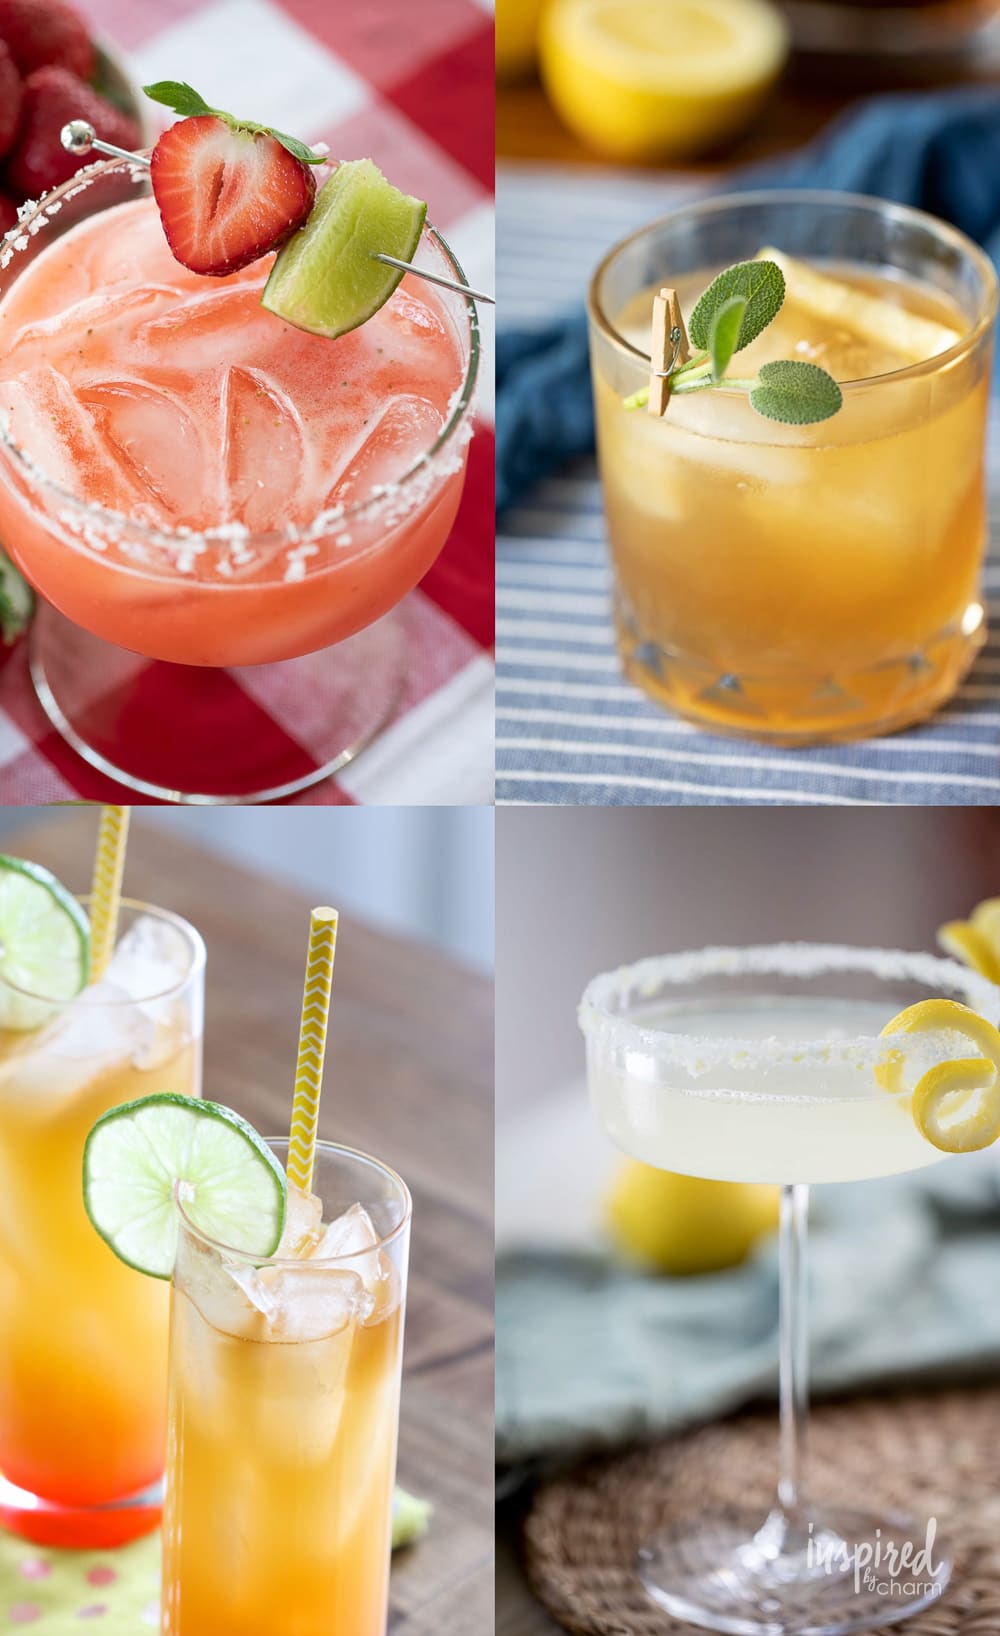 The Best Mixed Drinks - Unique and Classic Cocktail Recipes